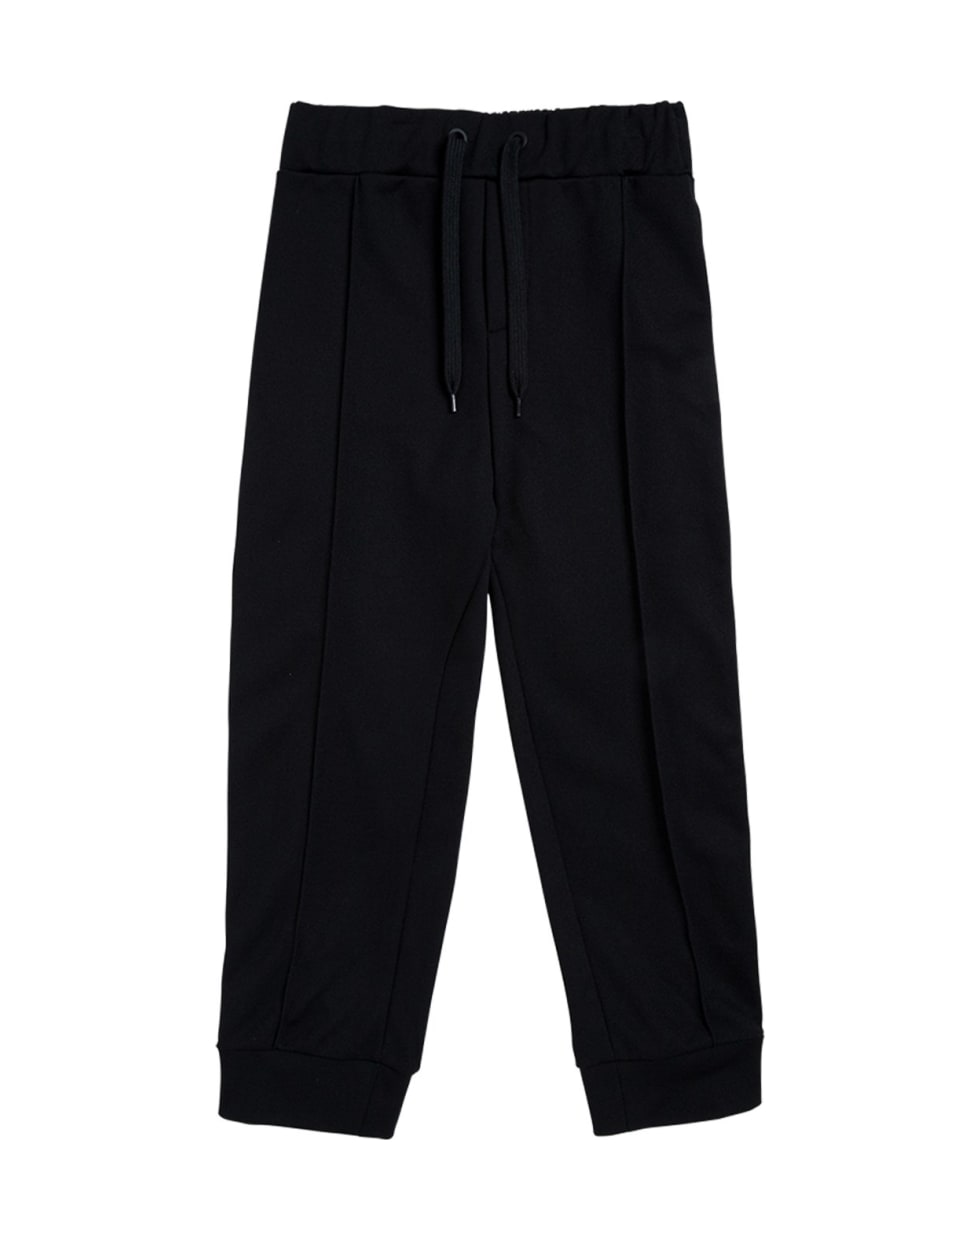 Fendi Cotton Blend Trousers With Ff Side Bands - Black